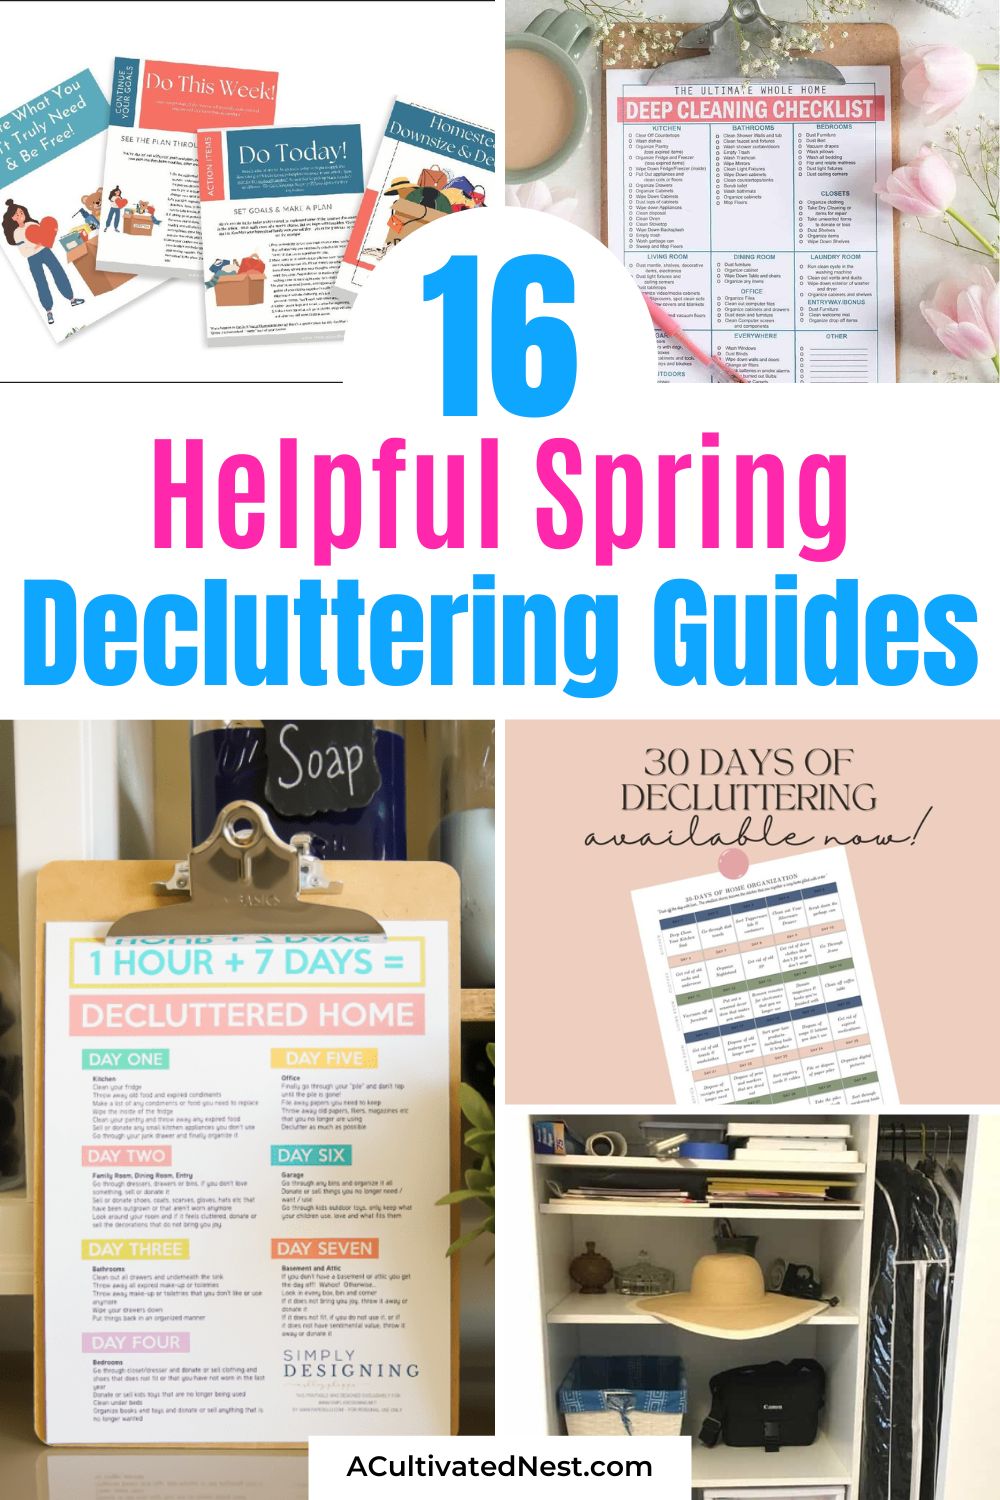 16 Helpful Spring Decluttering Guides- Spring into action with these 16 MUST-READ spring decluttering guides! From printable calendars for a 30-day decluttering challenge to minimalist tips for a major cleanup, we've got everything you need. These handpicked guides will help you breeze through your spring cleaning, making decluttering feel like a breeze. | #DeclutteringTips #SpringCleaning #DeclutterYourHome #HomeOrganizationTips #ACultivatedNest